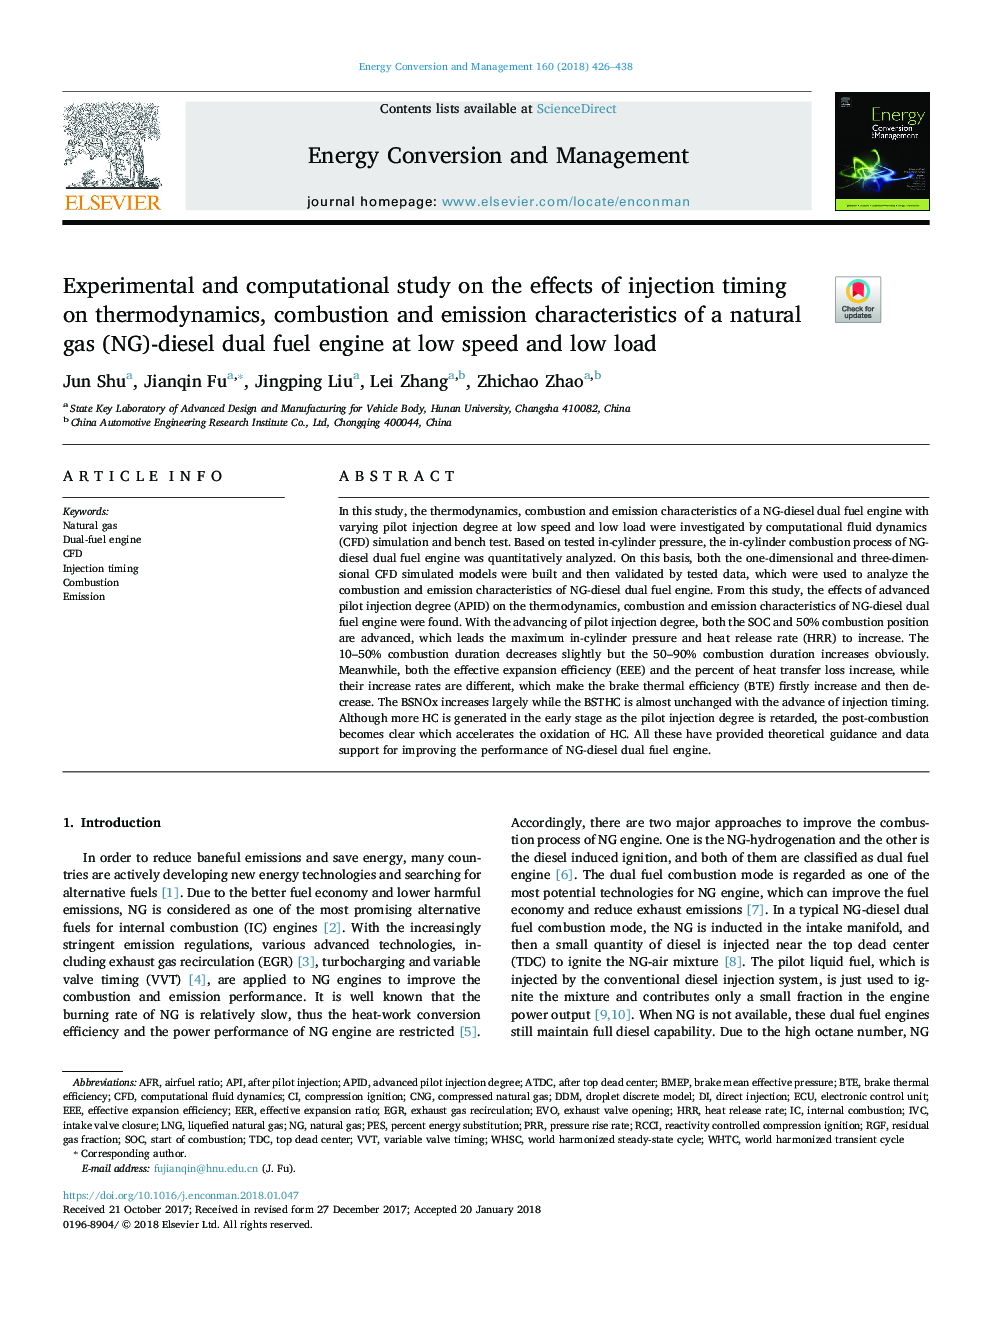 Experimental and computational study on the effects of injection timing on thermodynamics, combustion and emission characteristics of a natural gas (NG)-diesel dual fuel engine at low speed and low load